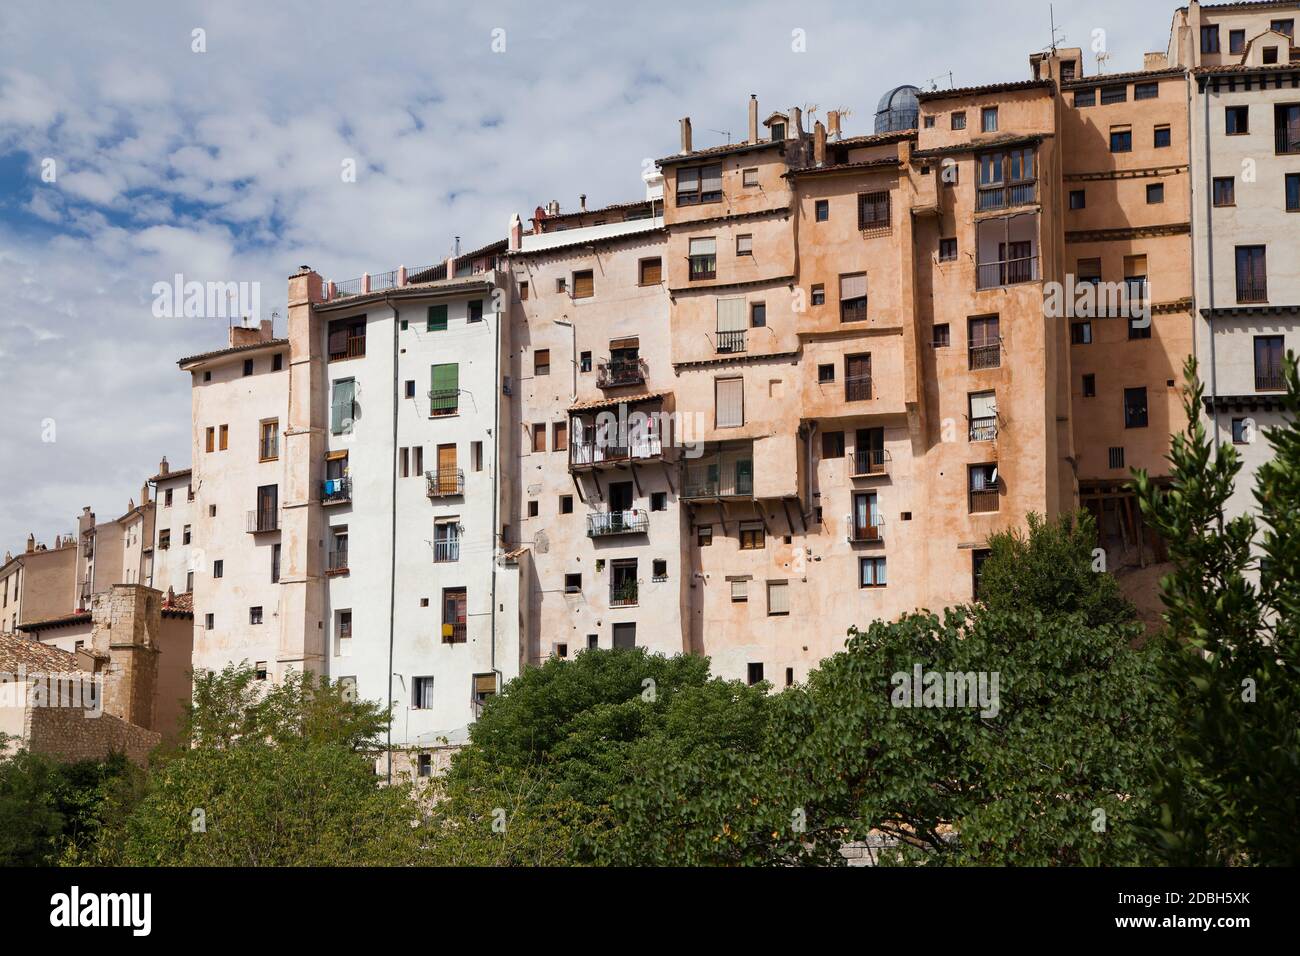 San Martin Skyscrapers, famous medieval tall buildings, in Cuenca, Spain. Stock Photo